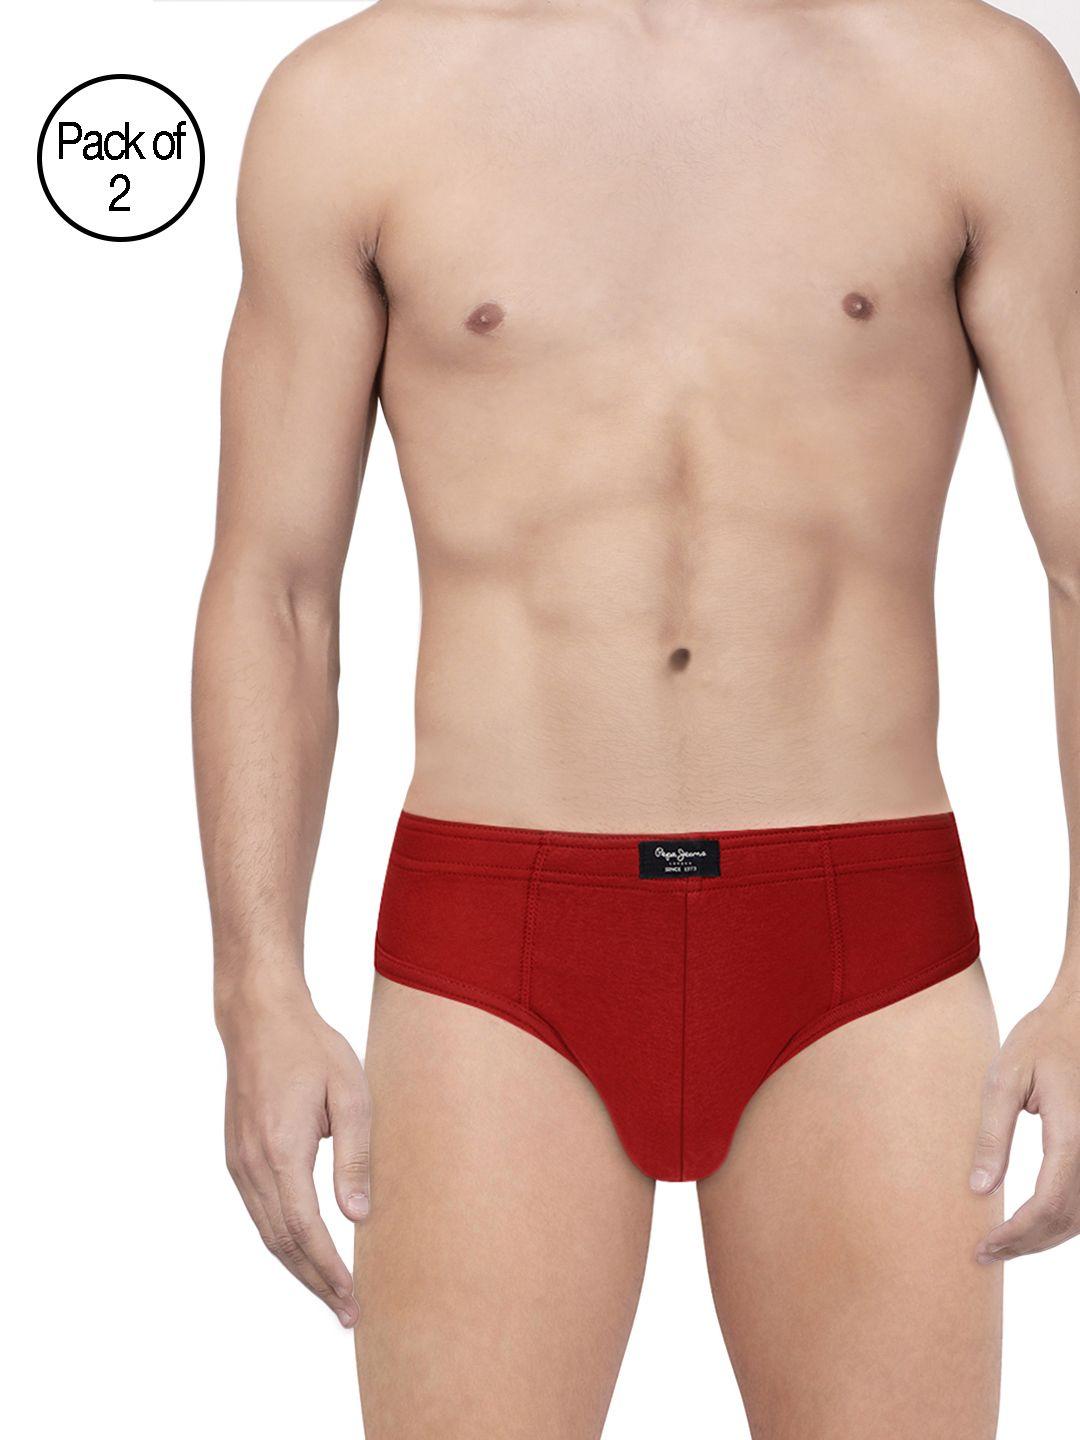 pepe-jeans-men-pack-of-2-red-briefs-8904311300076